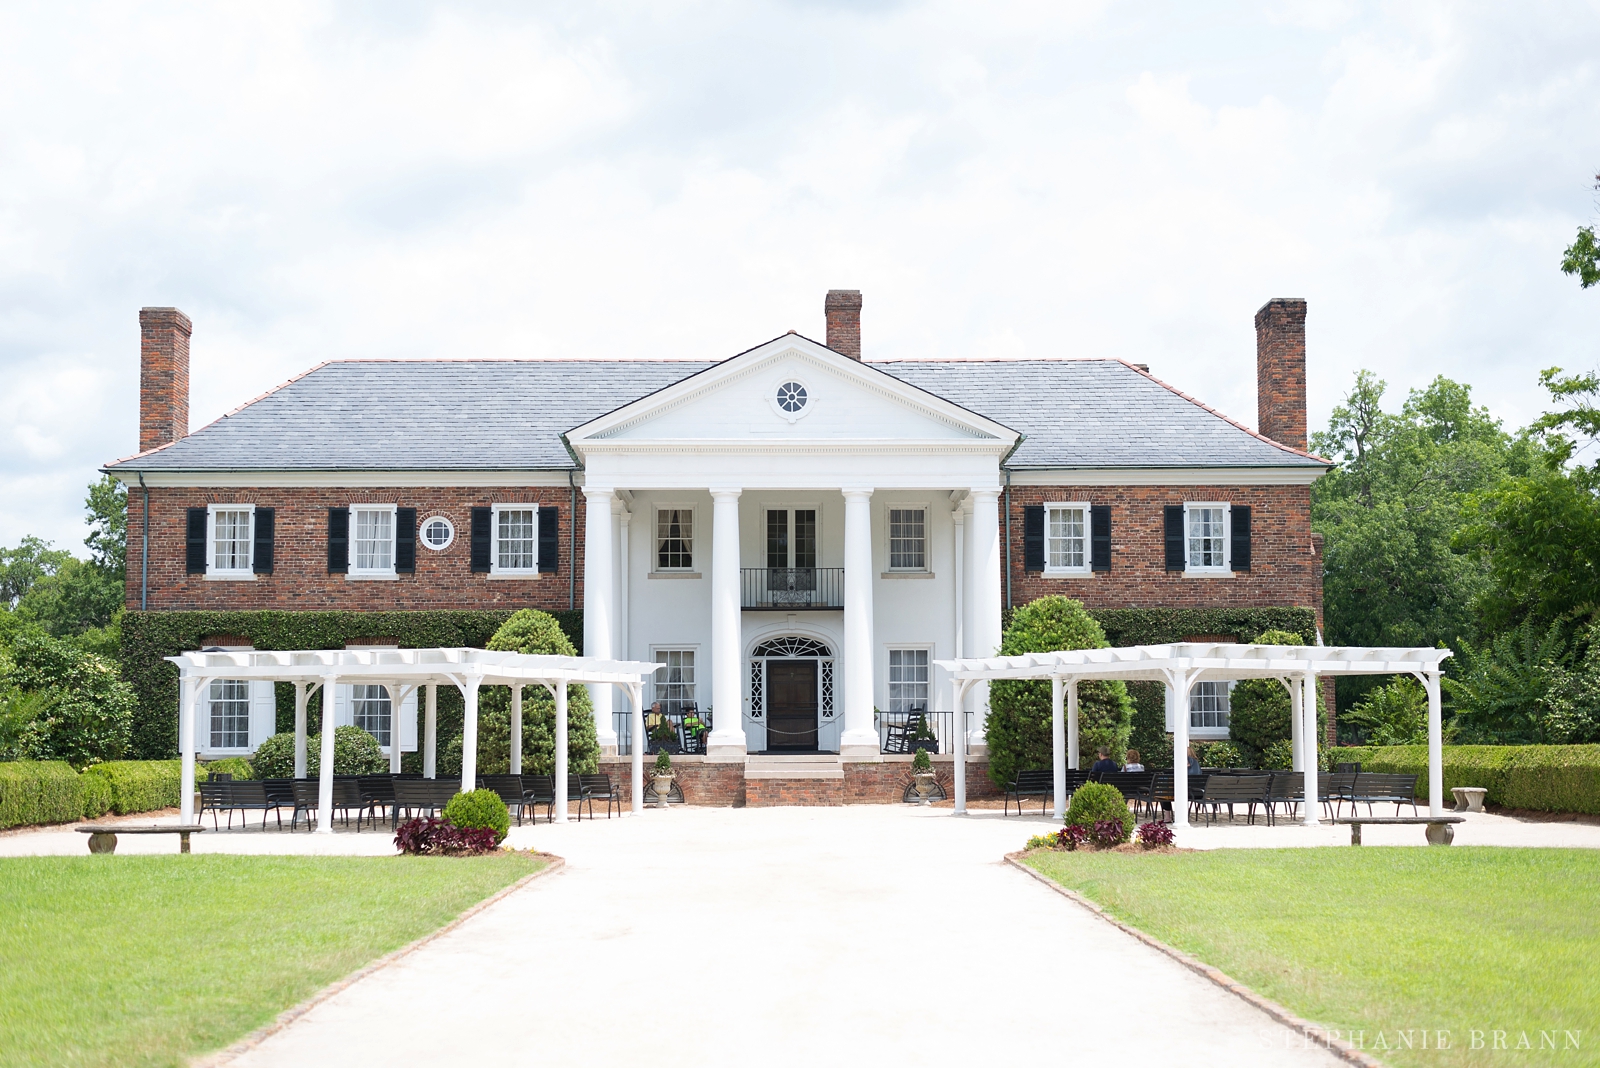 house-location-used-to-film-the-notebook-boone-hall-plantation